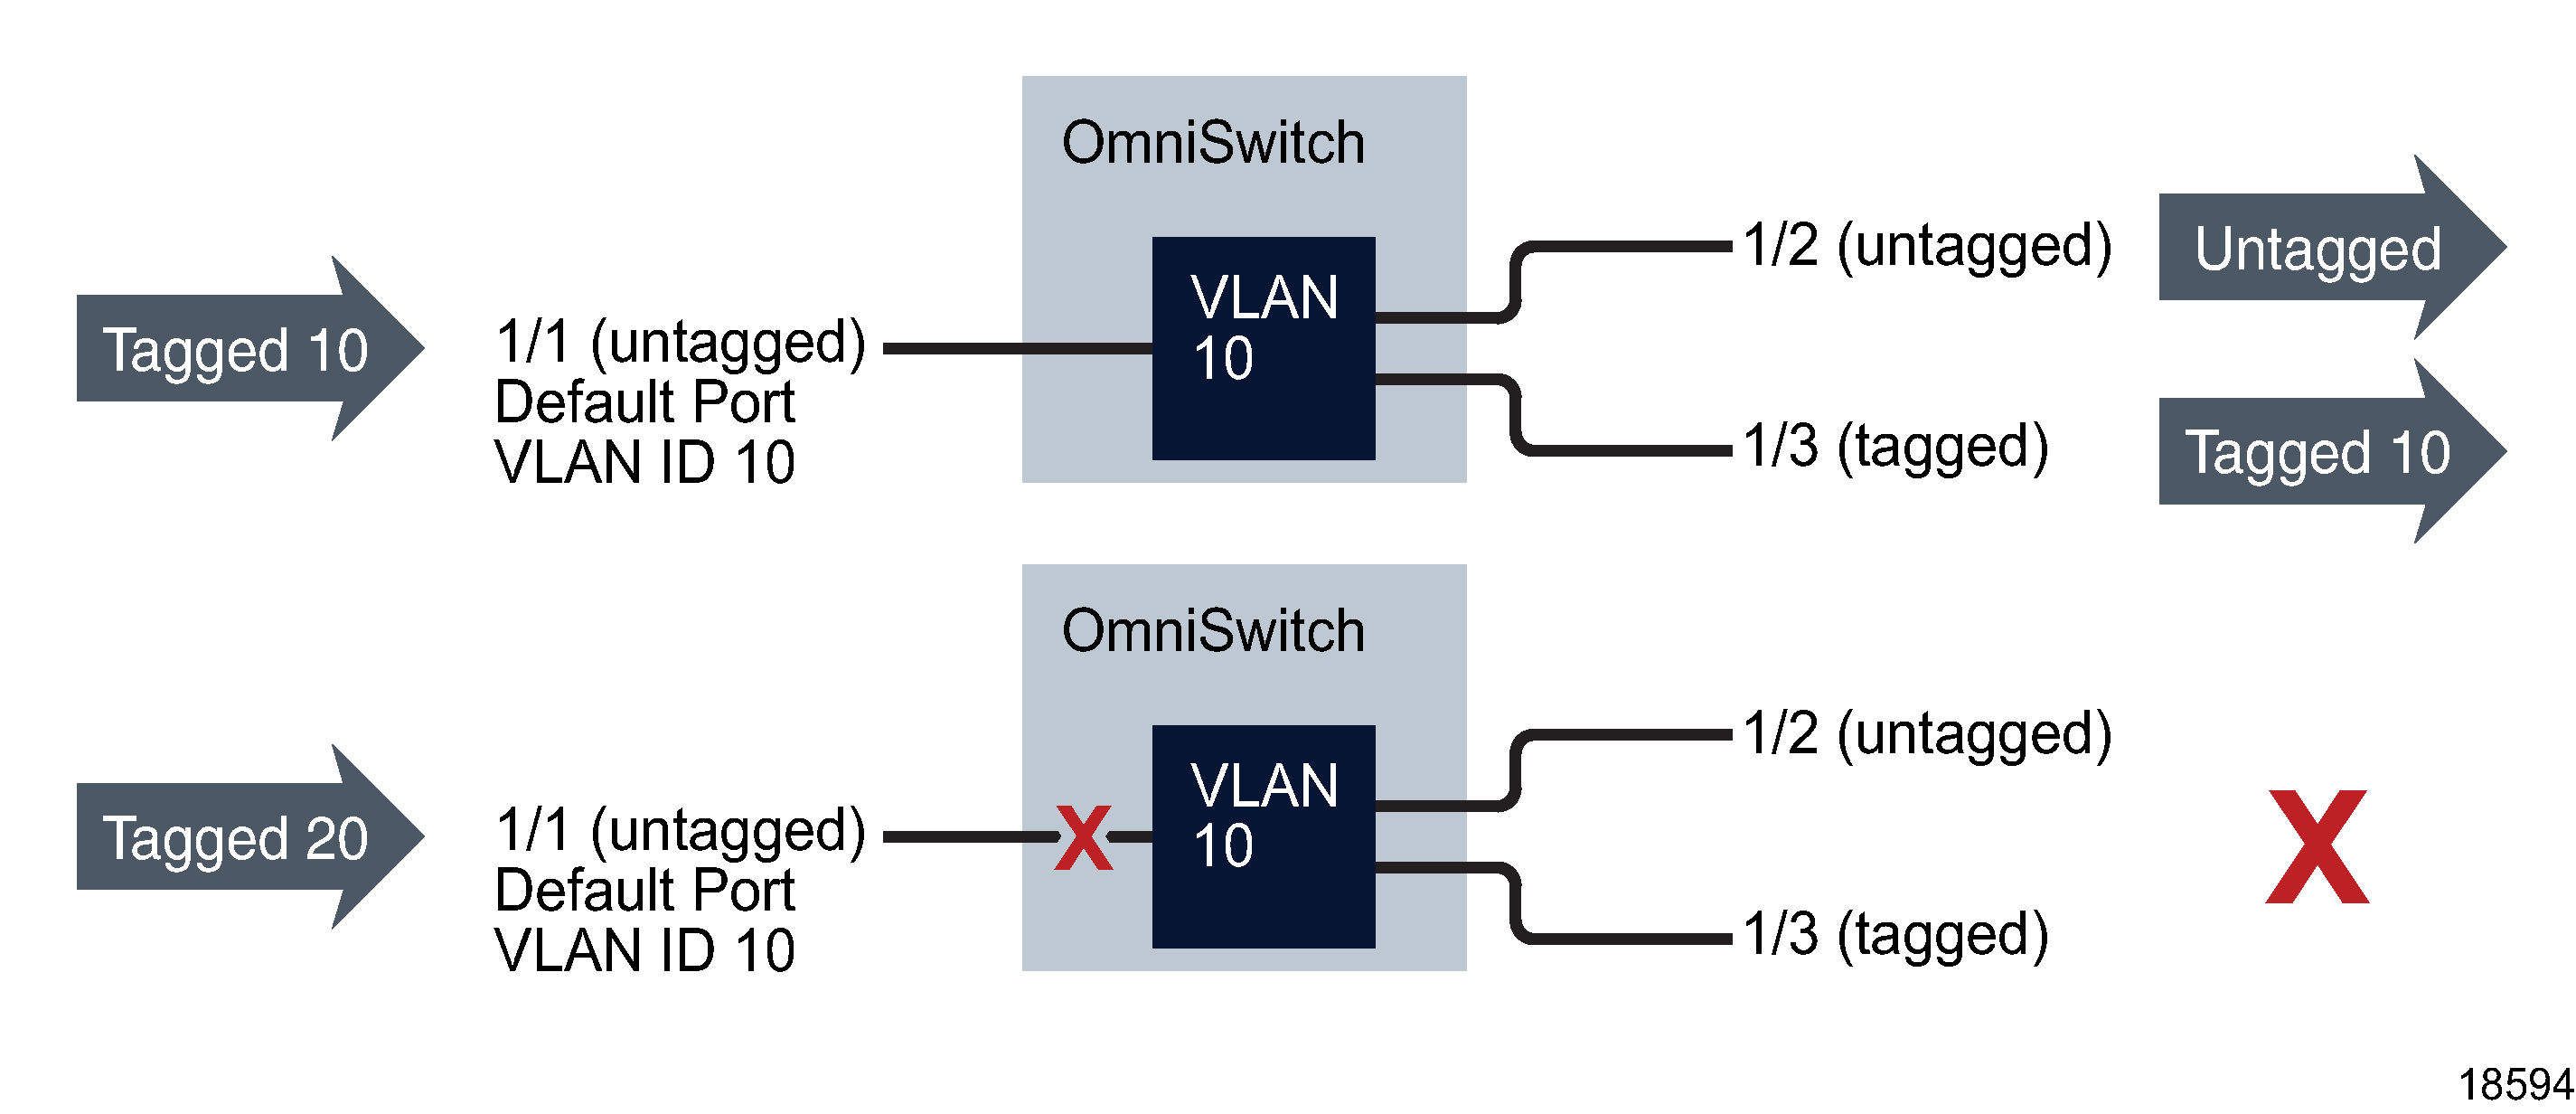 Tagged traffic and VLANs